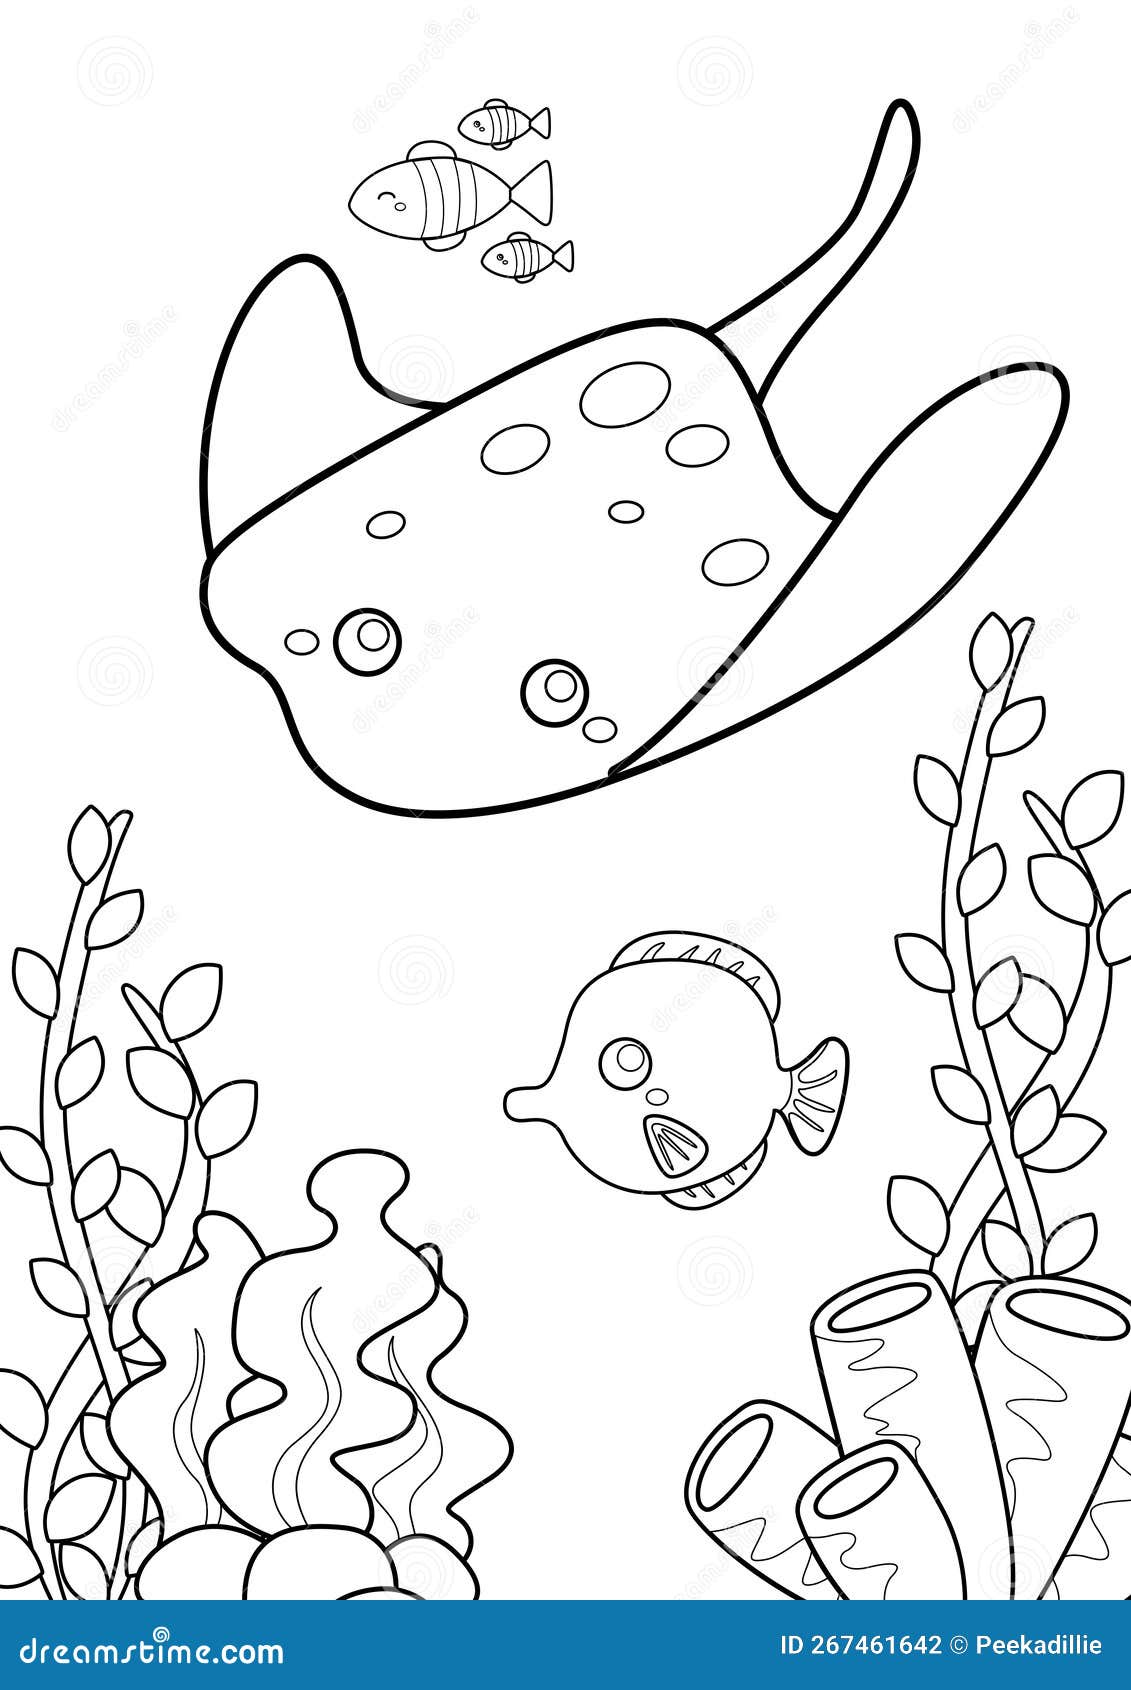 Underwater animals stingray and fish coloring pages for kids and adult stock illustration